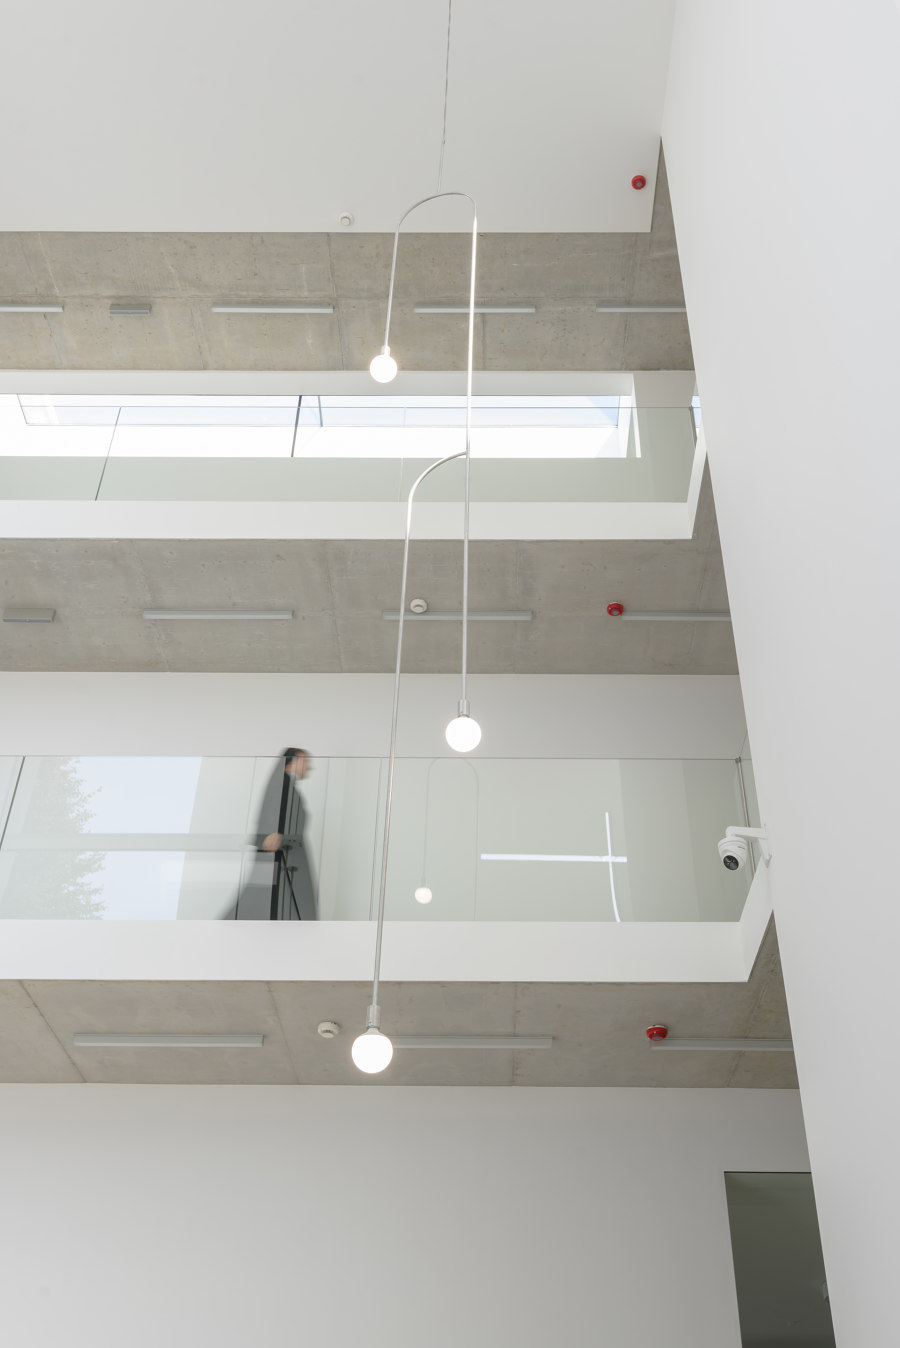 Pole dancing: POLISH ARCHITECTURE SHOWS OFF | Novedades